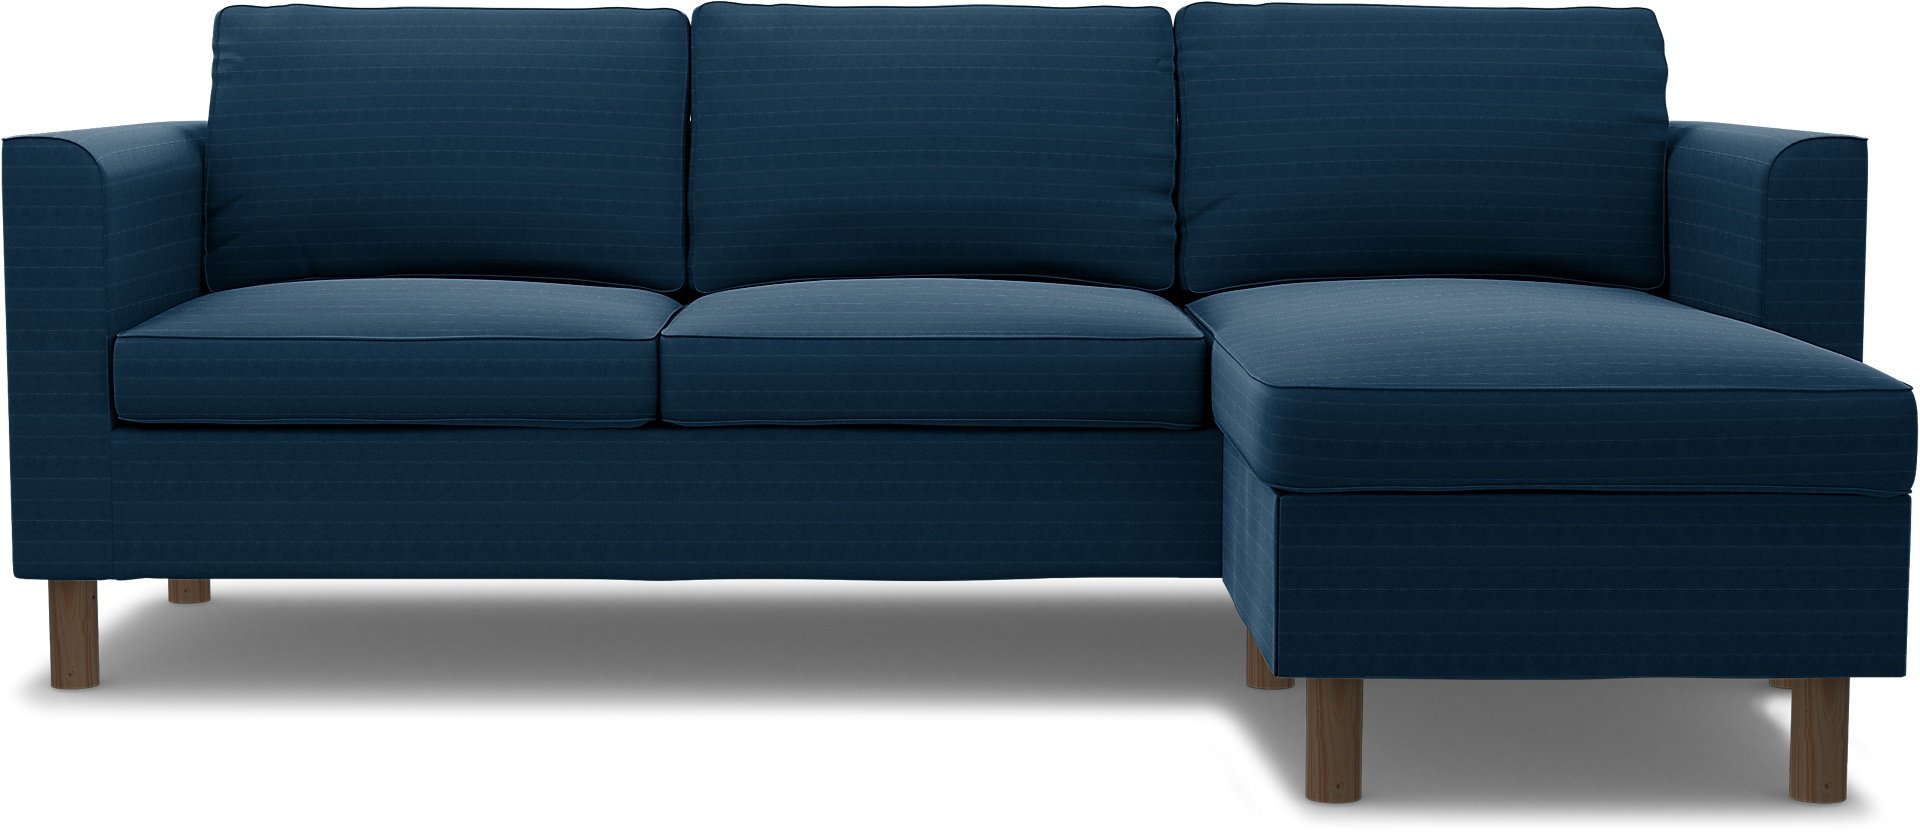 IKEA - Parup 3 Seater with chaise longue, Denim Blue, Moody Seventies Collection - Bemz